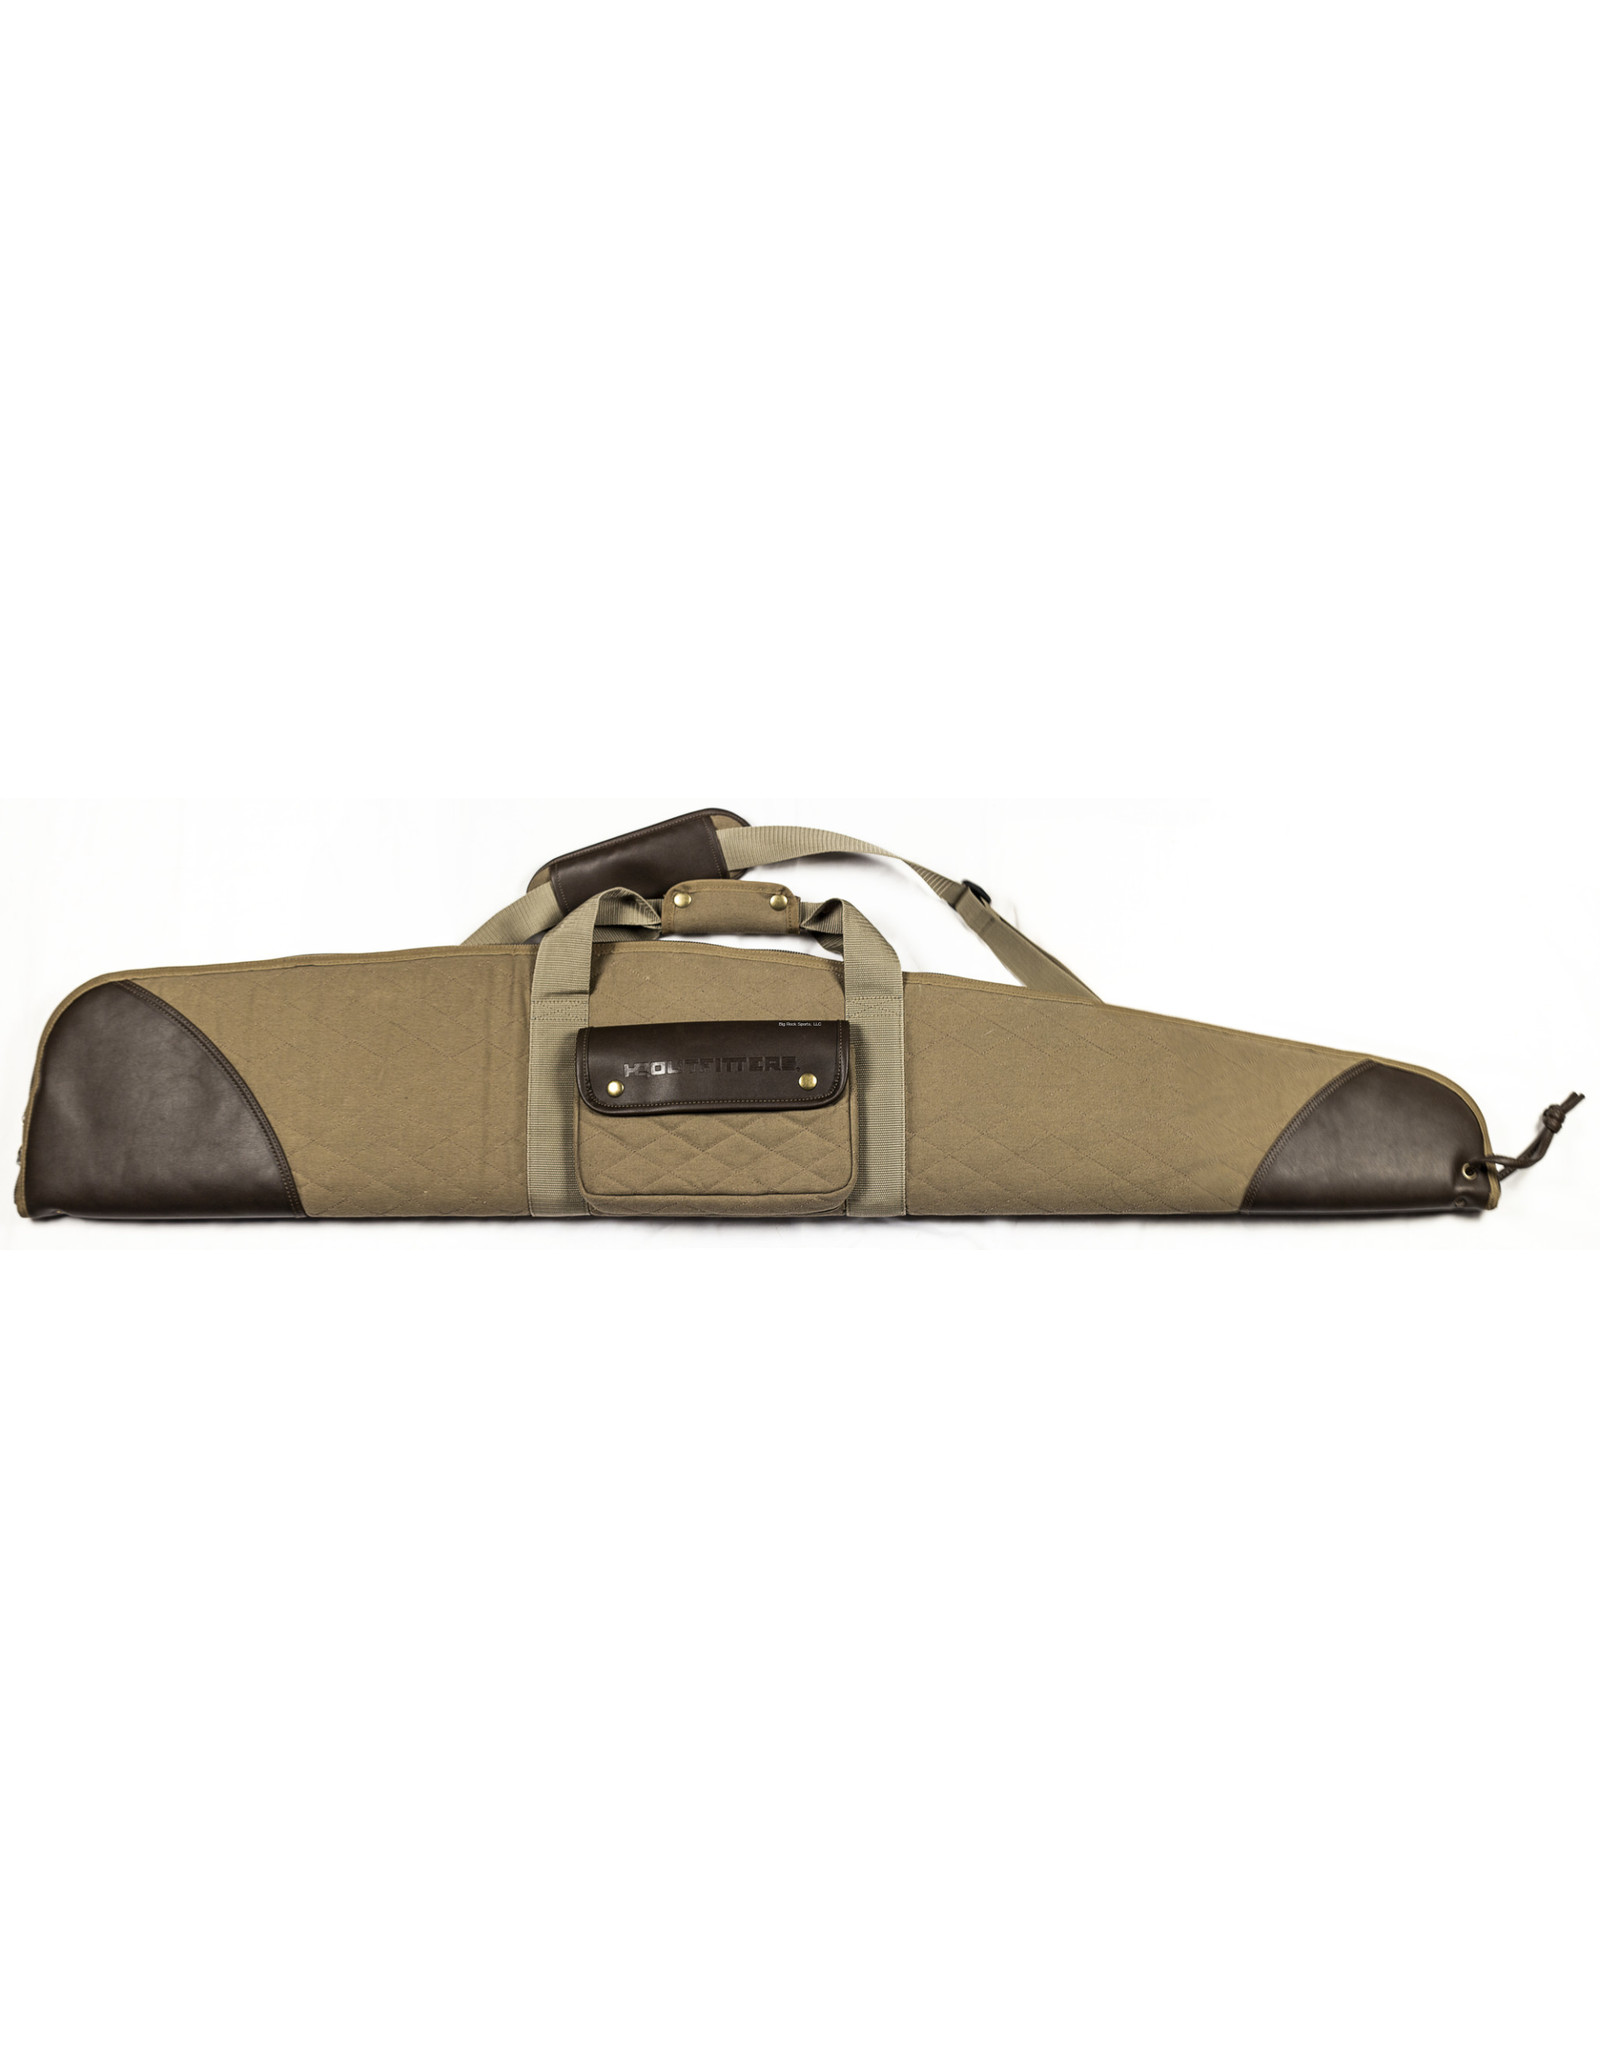 HQ Outfitters HQ Outfitters HQ-CSC52 Classic Canvas Shotgun Case, 52"